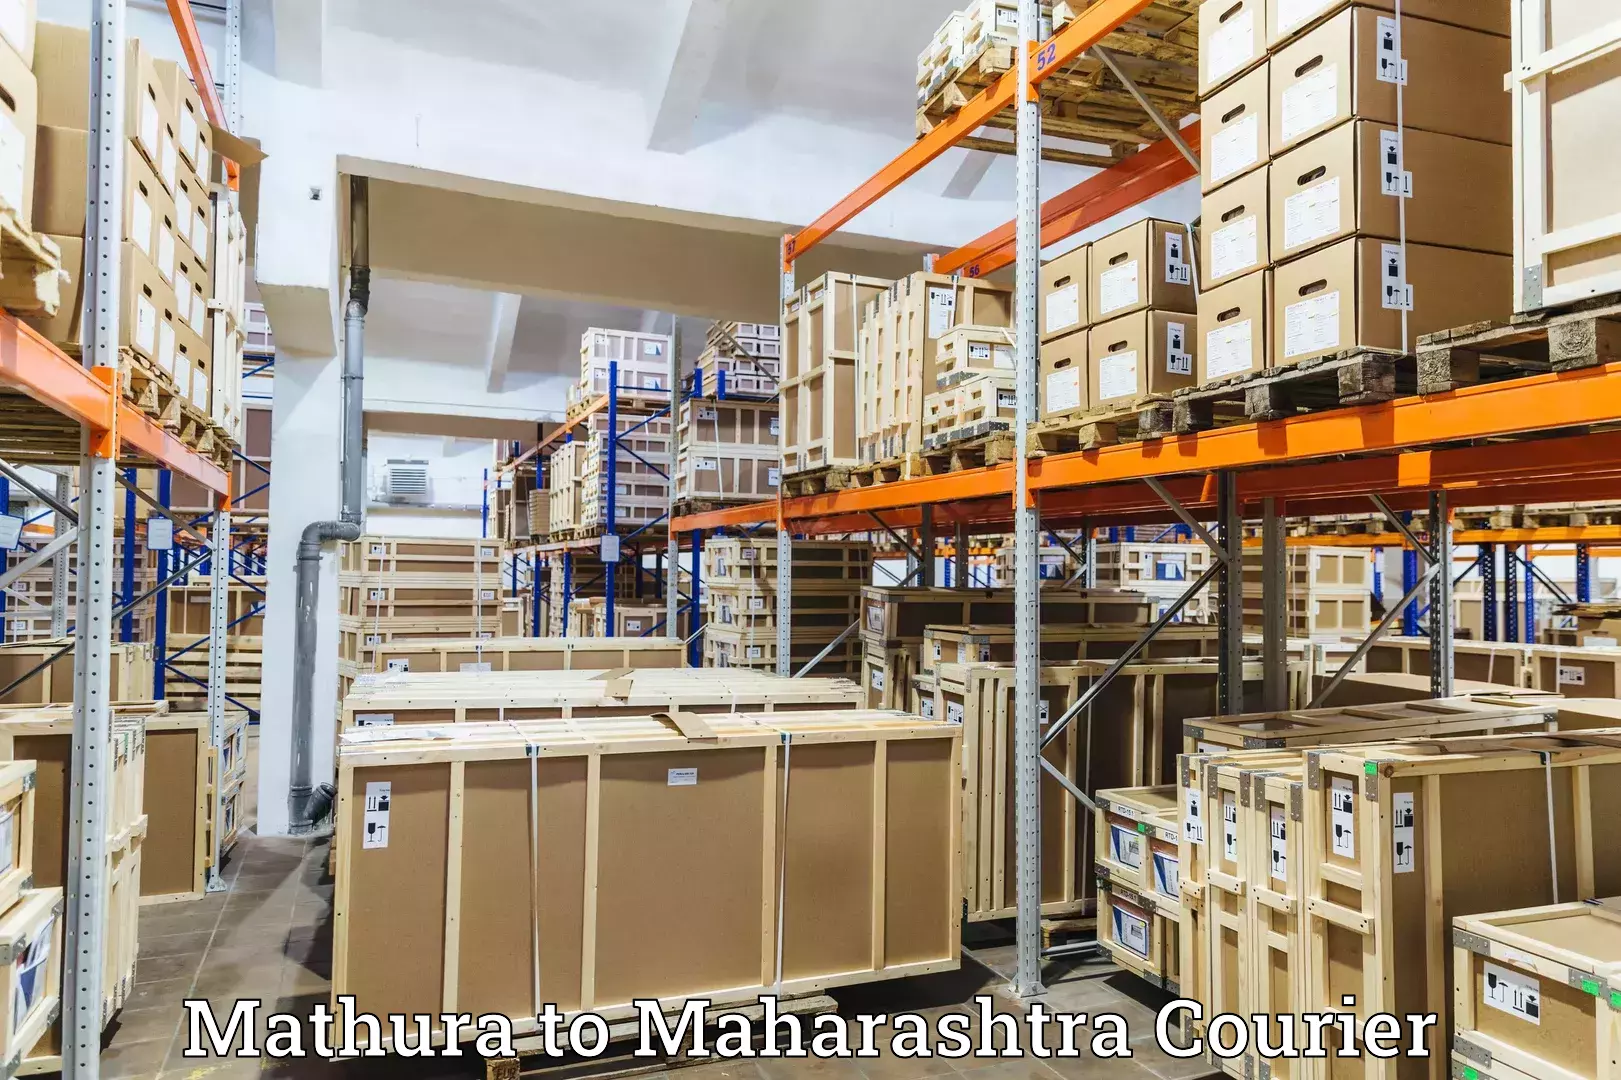 Same-day delivery options Mathura to Shevgaon